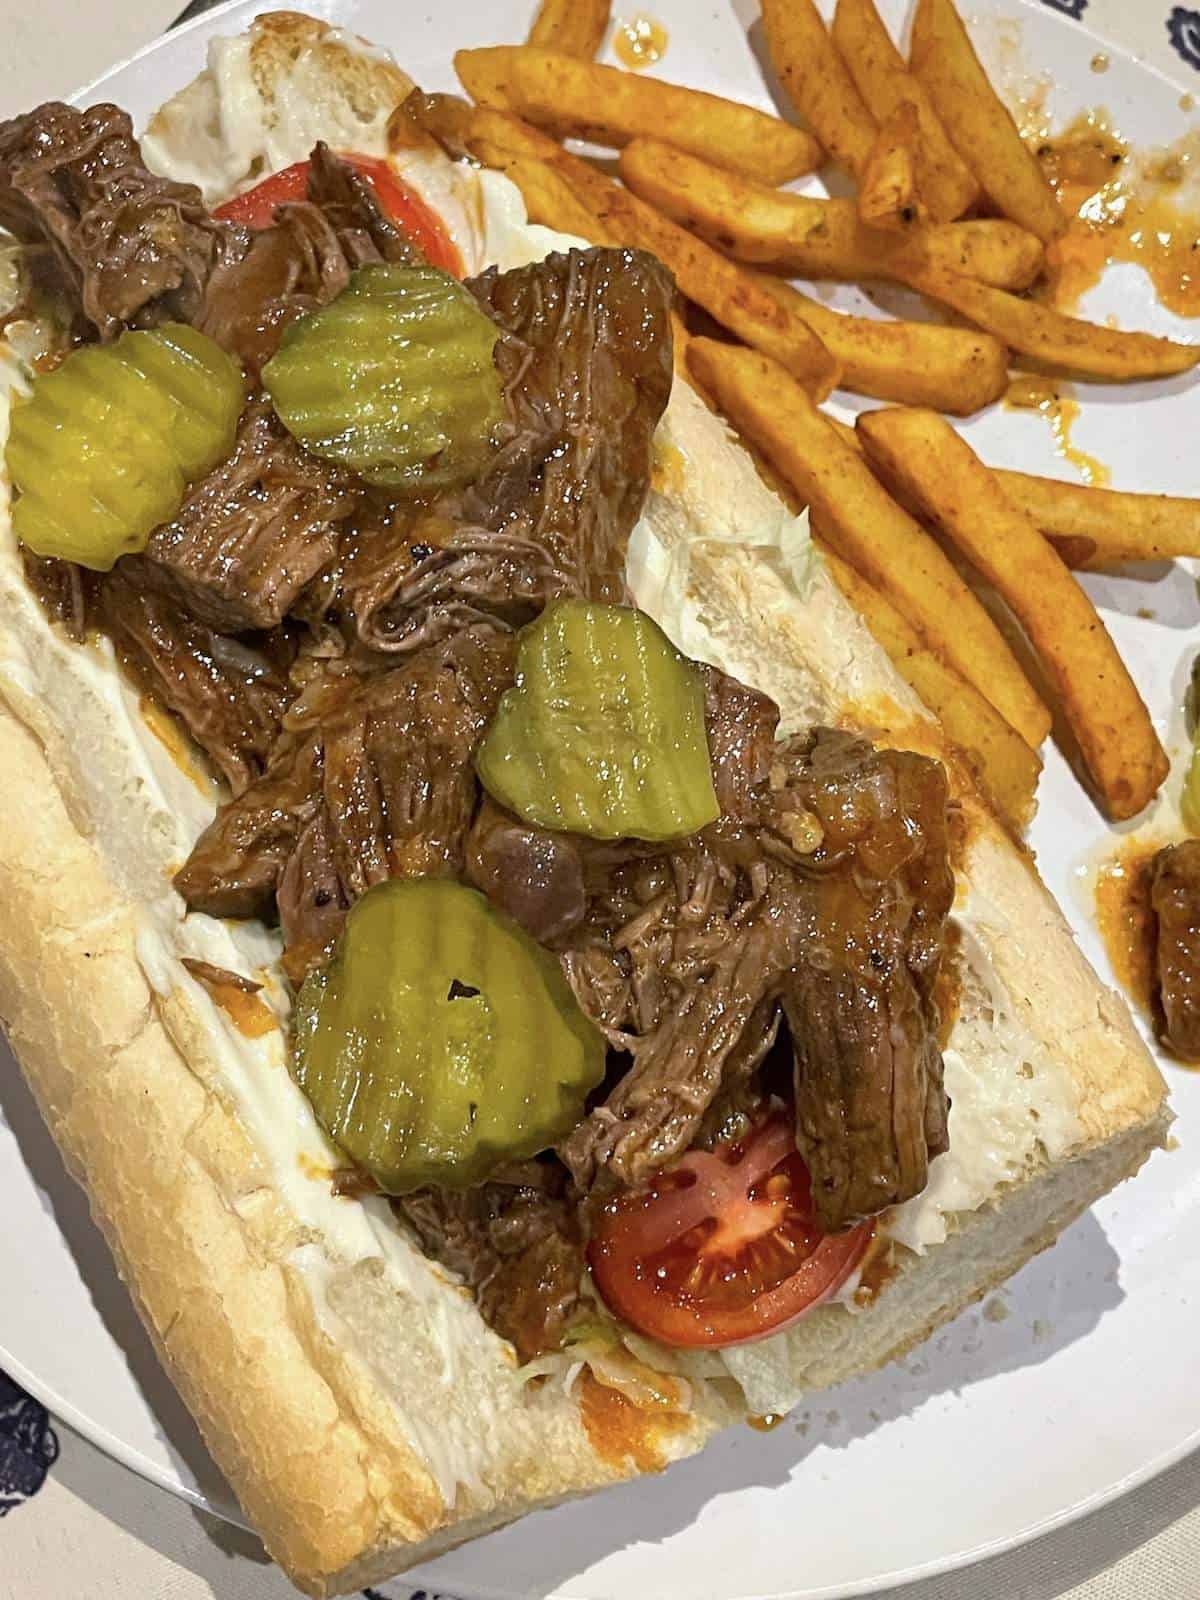 A roast beef debris po boy on French bread with lettuce, tomato, and pickles with fries on the side.